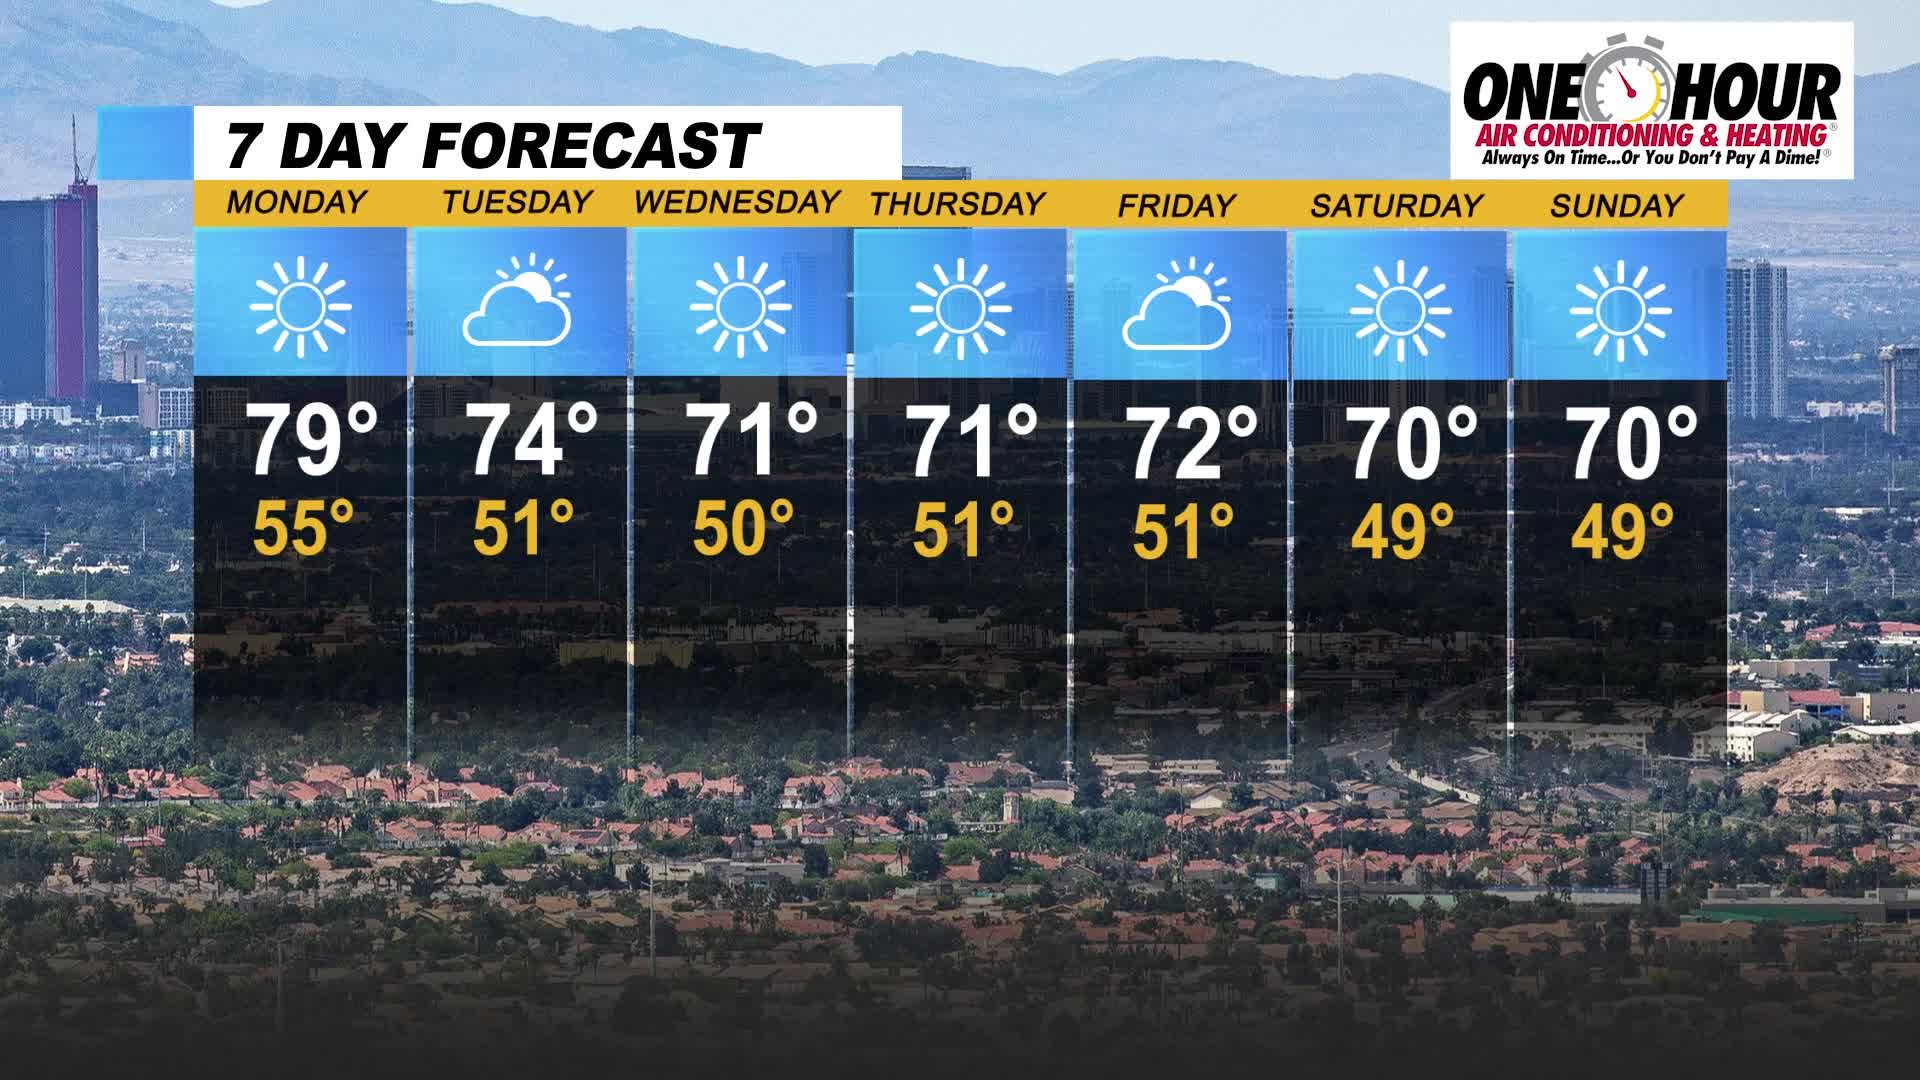 Temperatures Dip to Low 70’s later in the Week